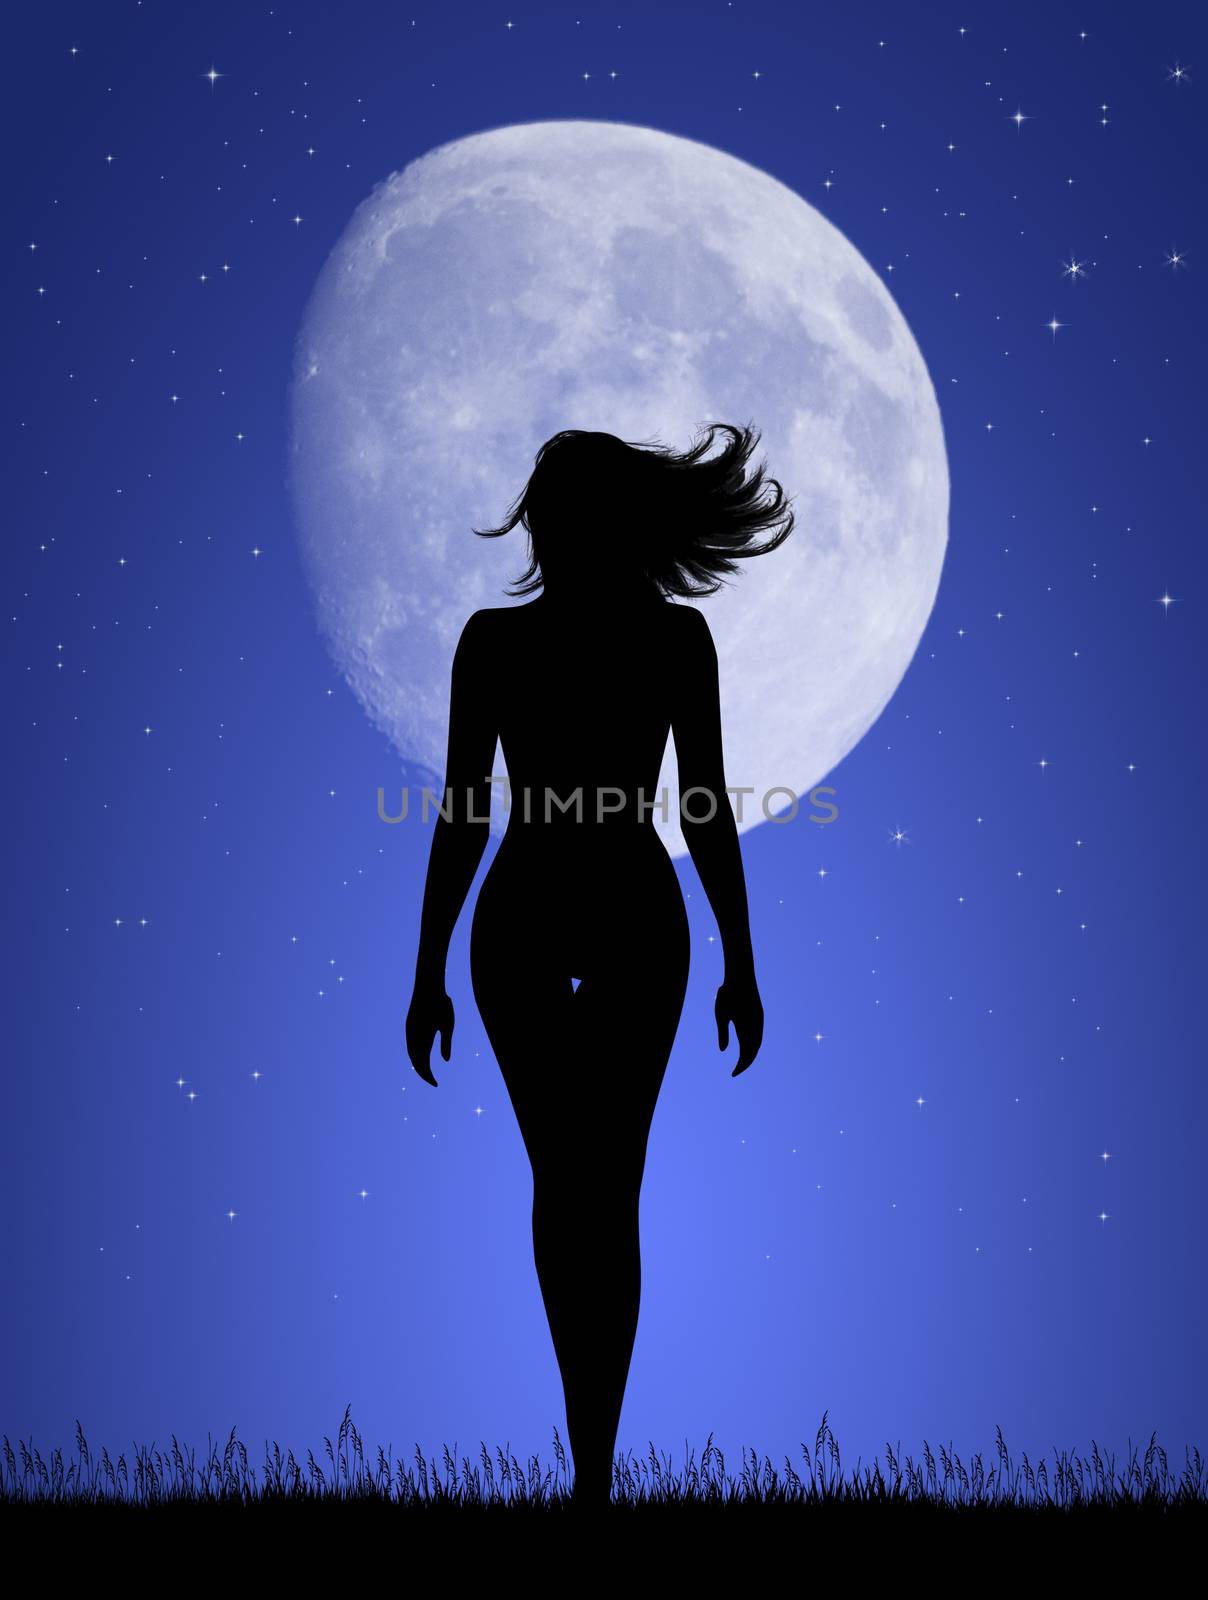 girl walking in the moonlight by adrenalina